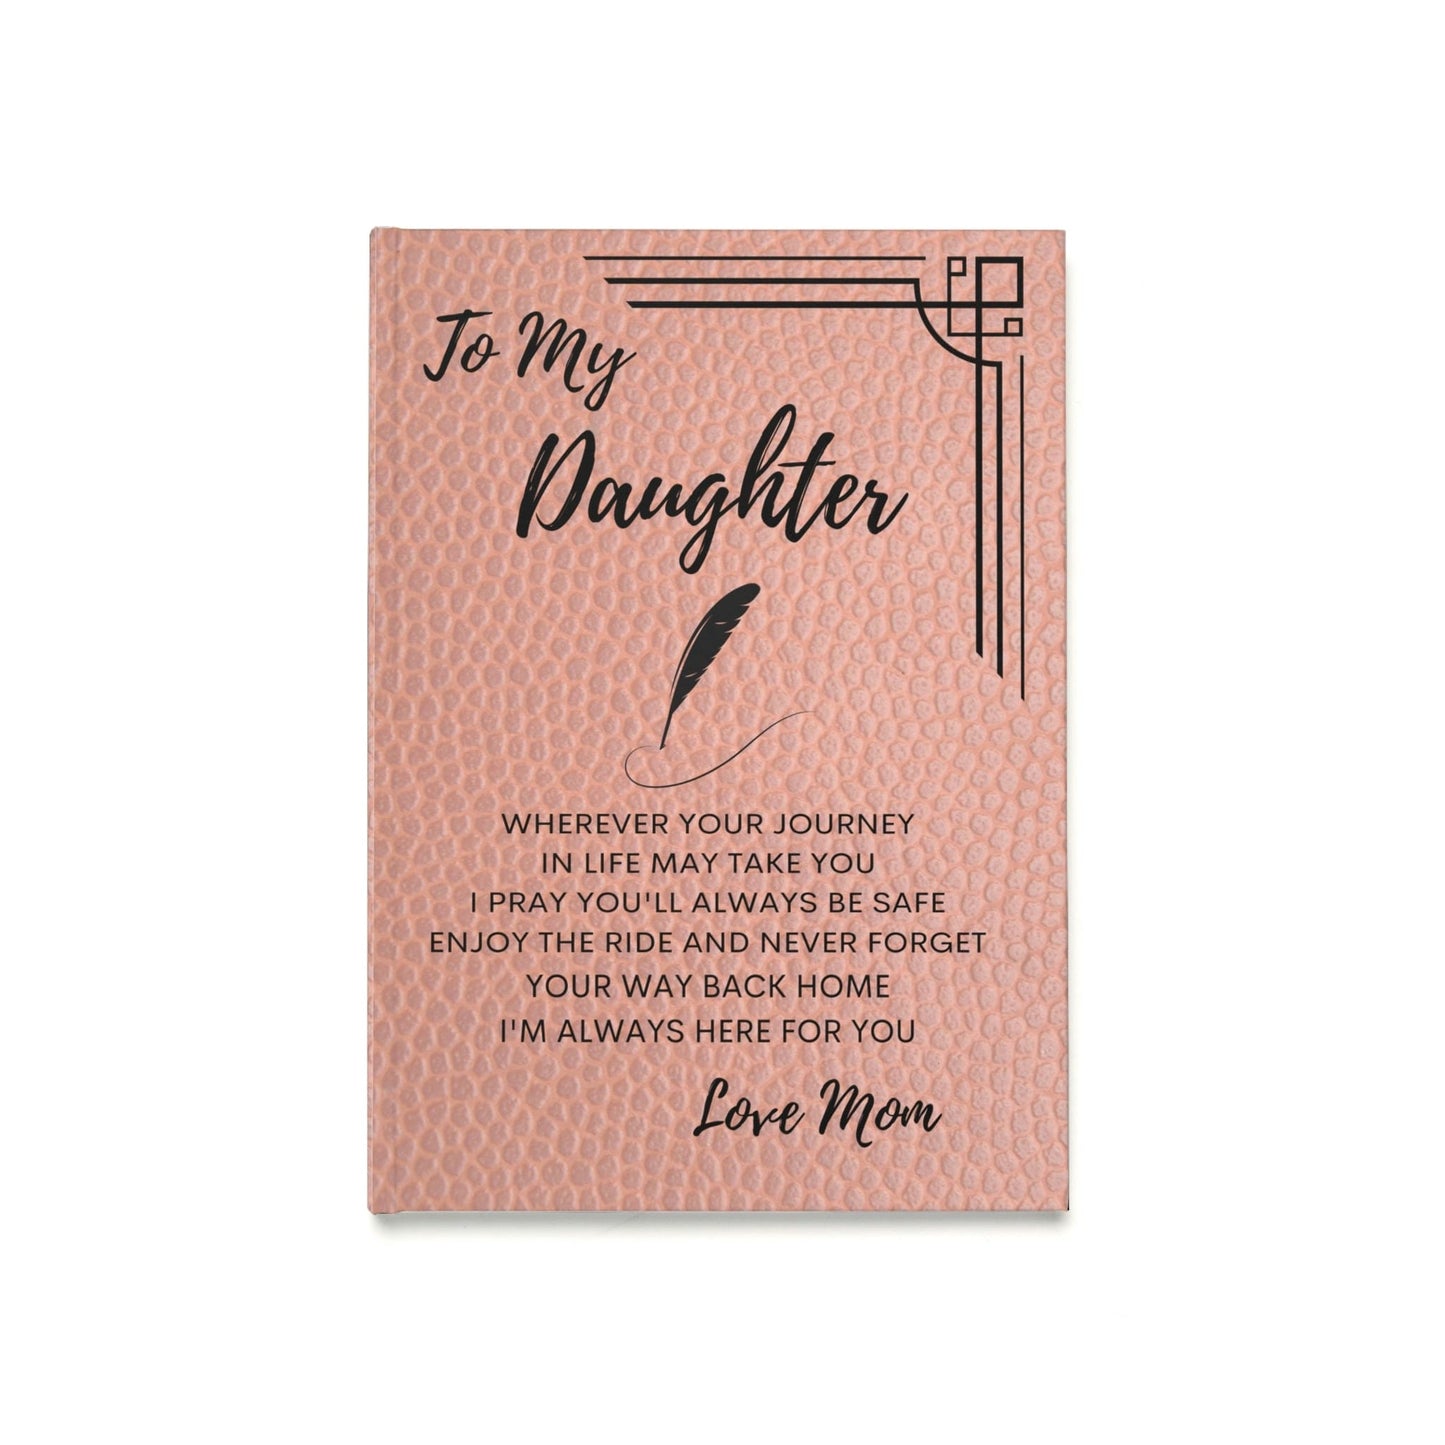 To My Daughter Journal